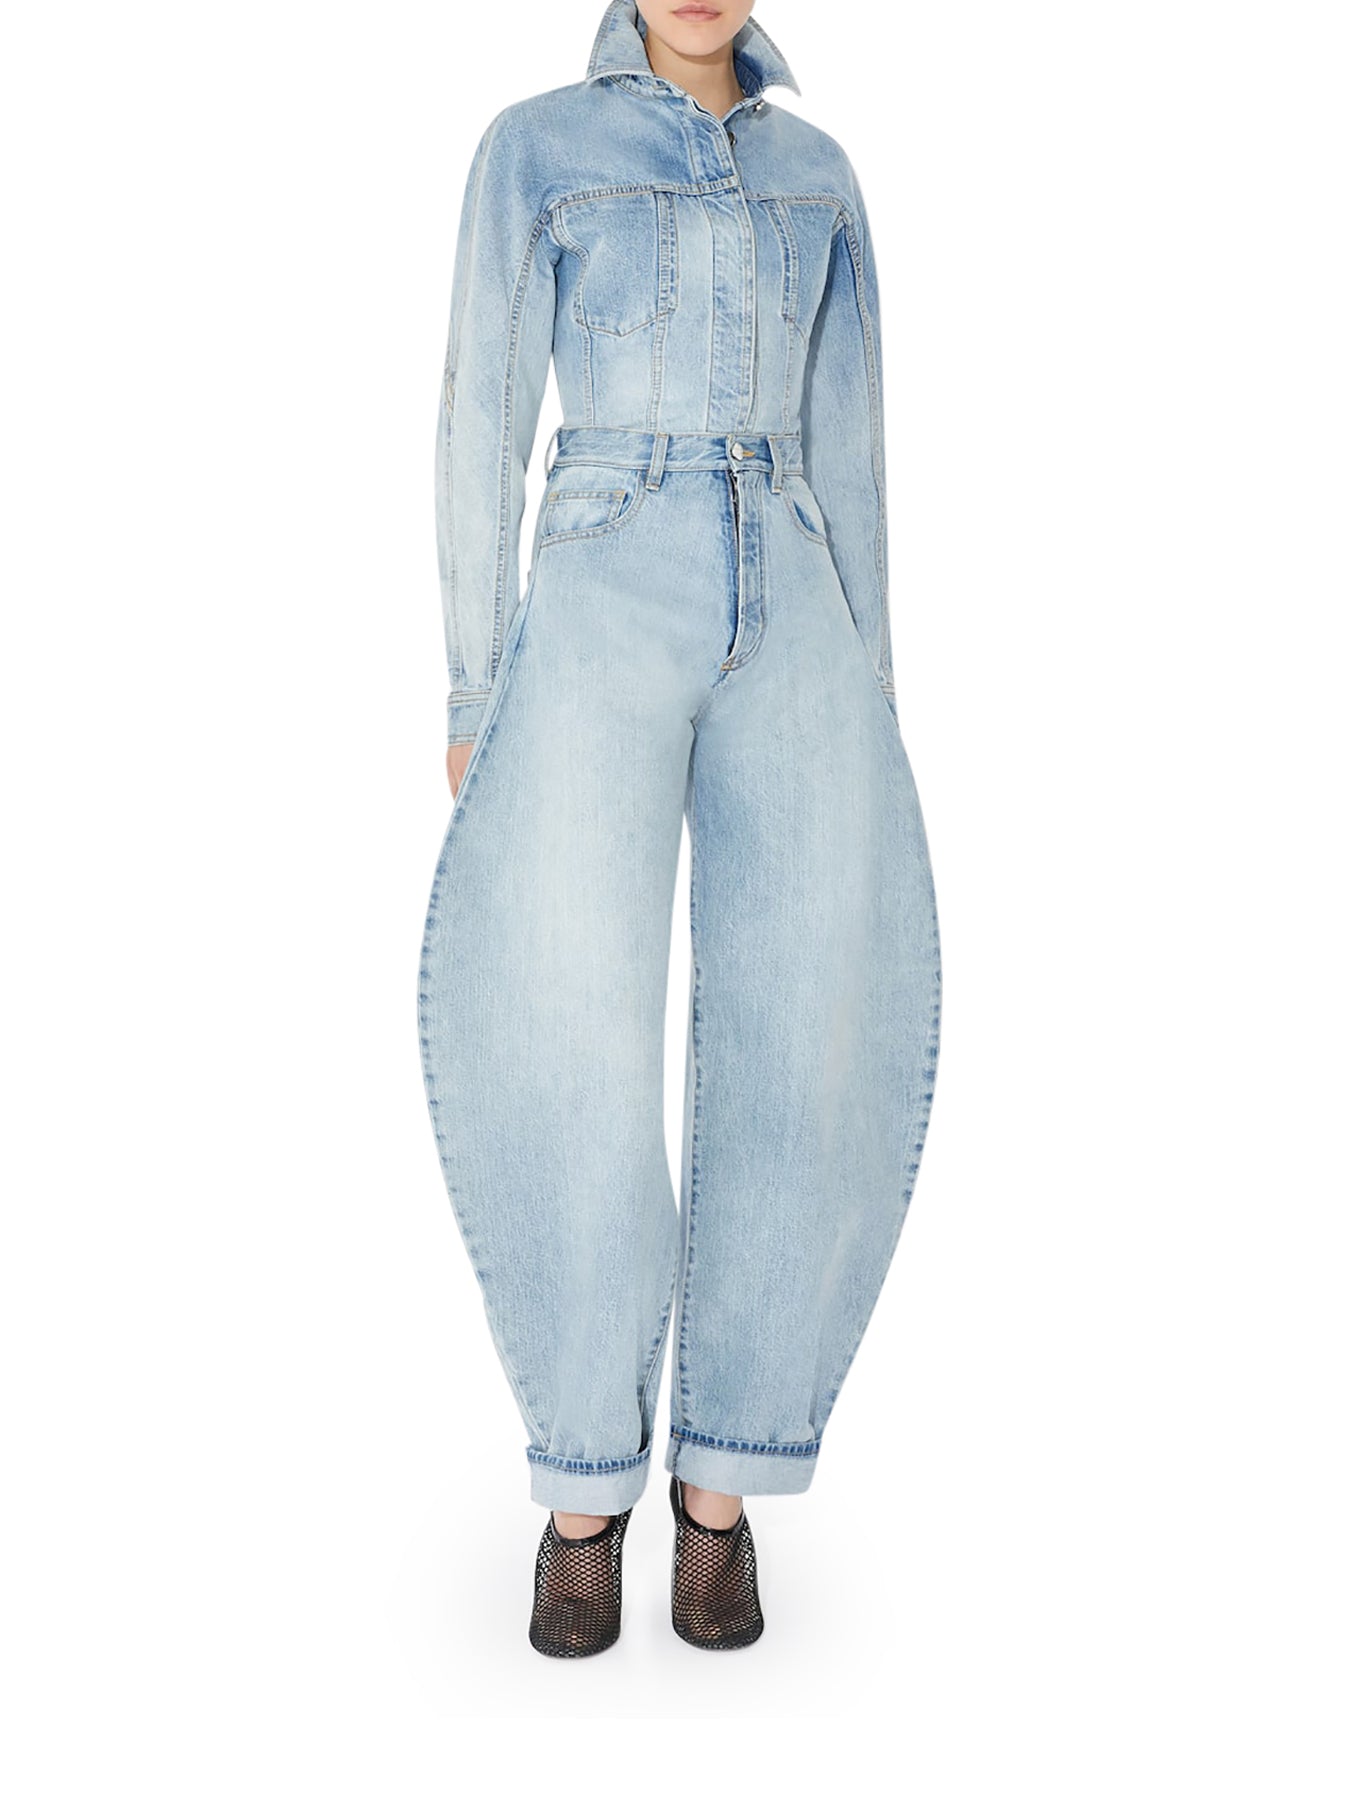 ROUNDED DENIM PANTS